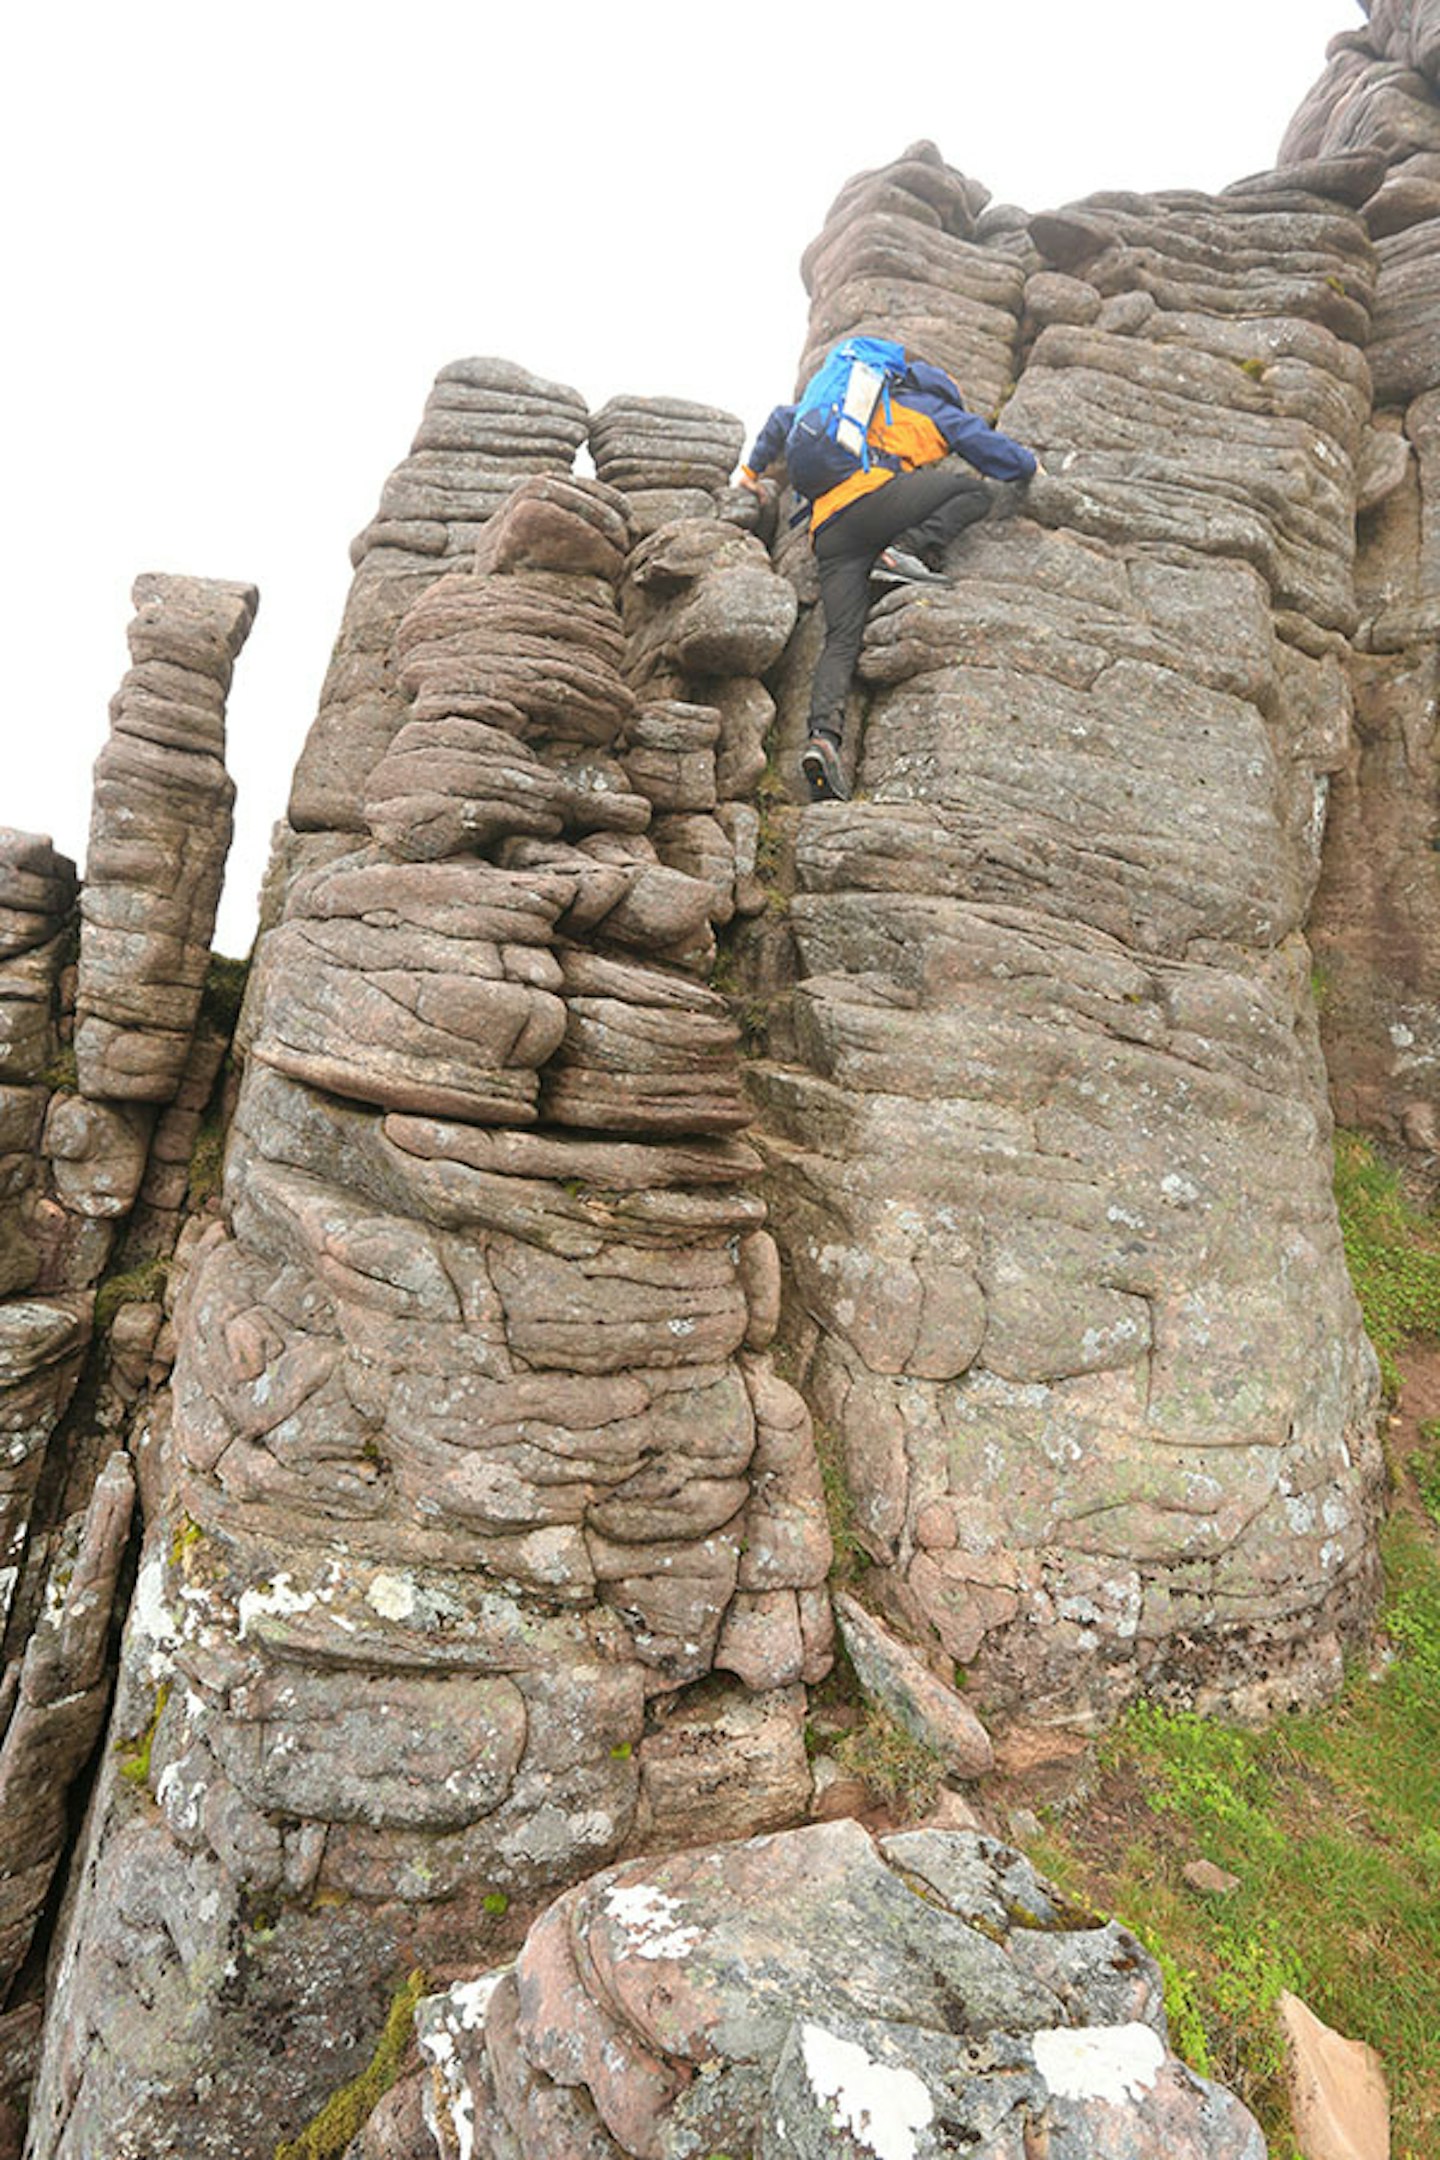 Clambering on the rounded, wind sculpted sandstone of An Teallach.